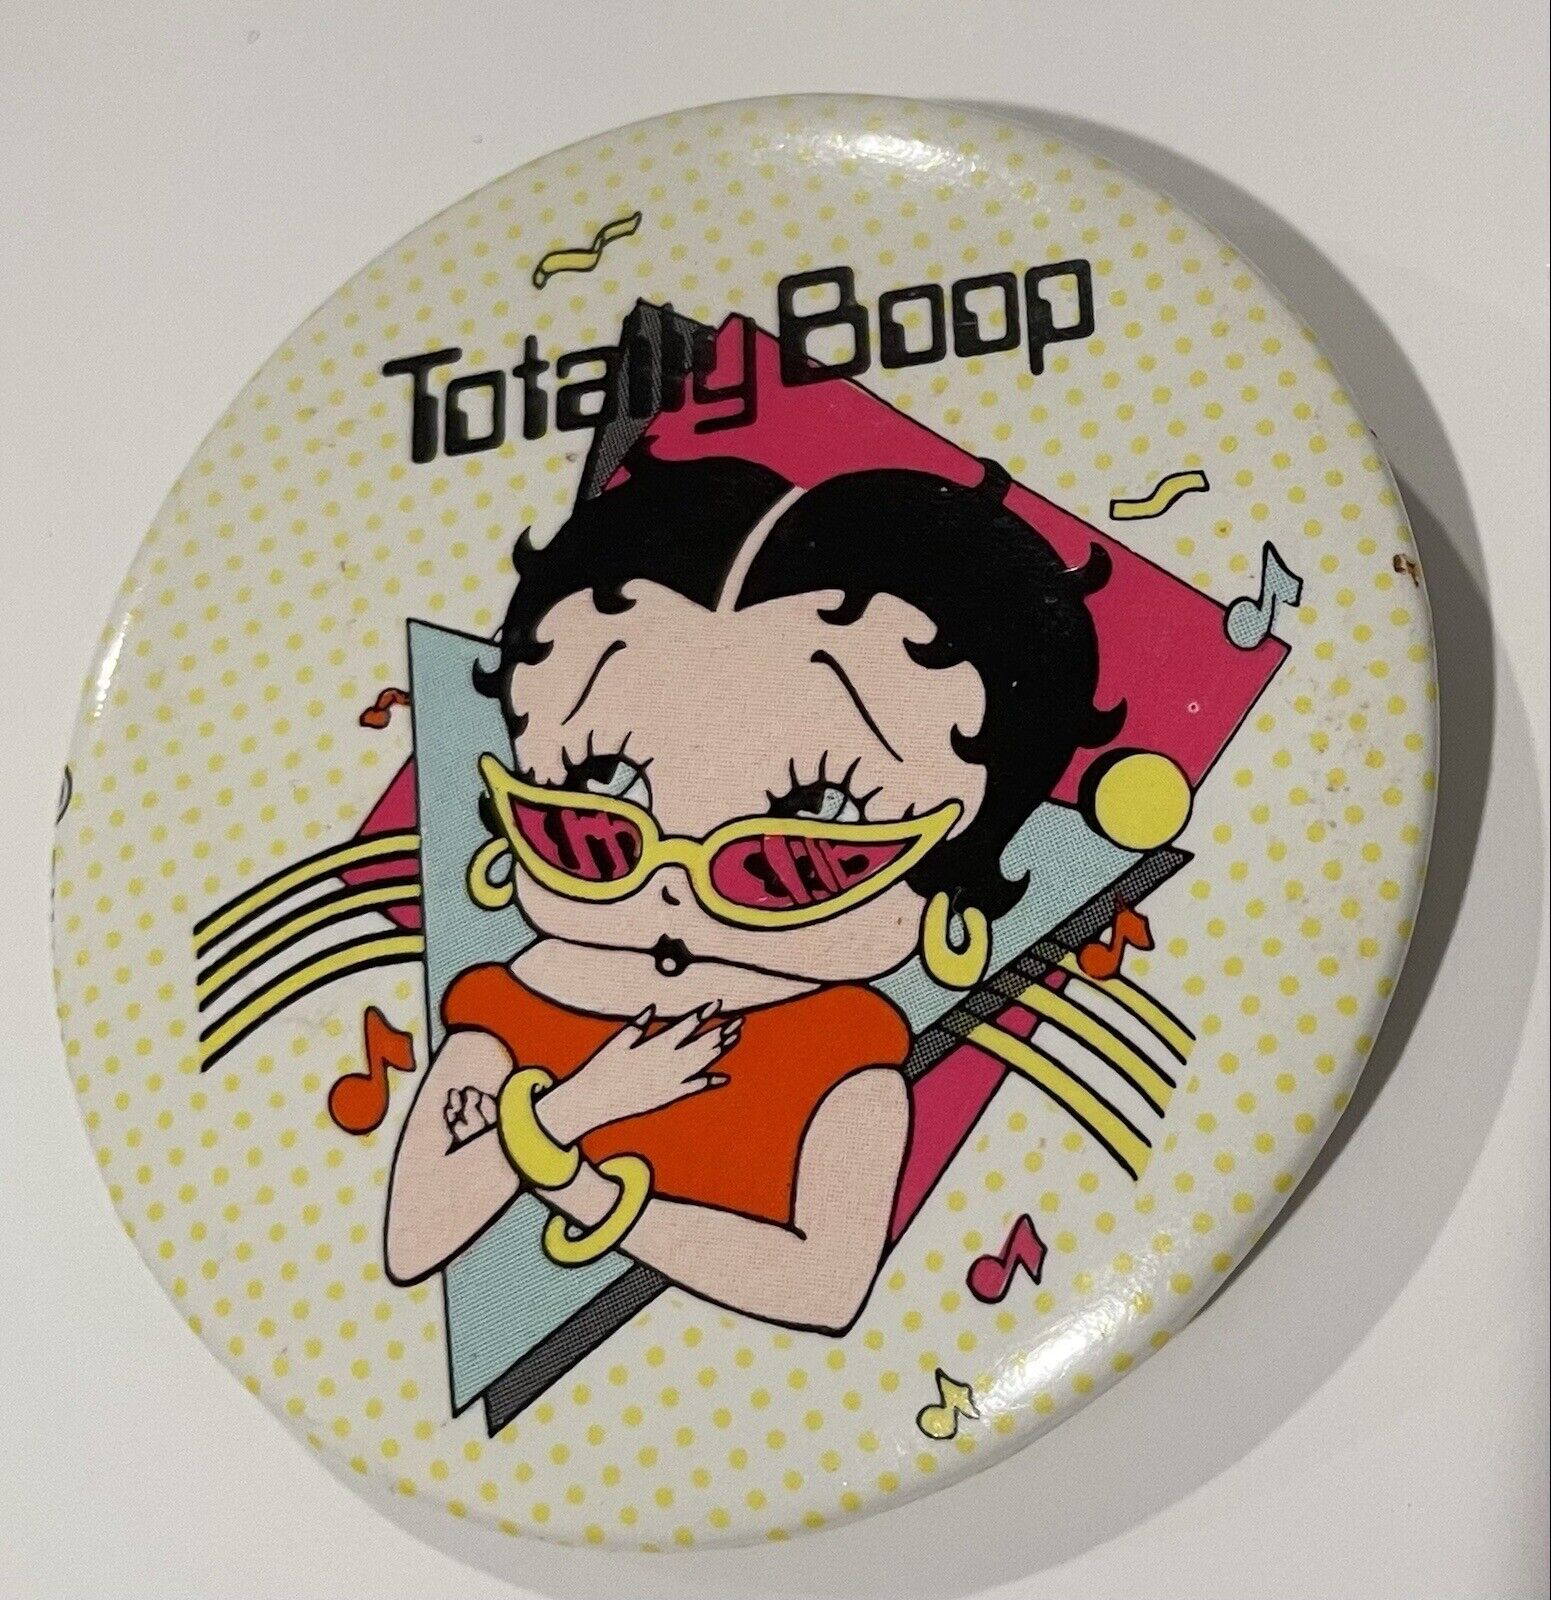 Betty Boop Totally Boop Music Pin Back Vintage Button King Features Syndicate